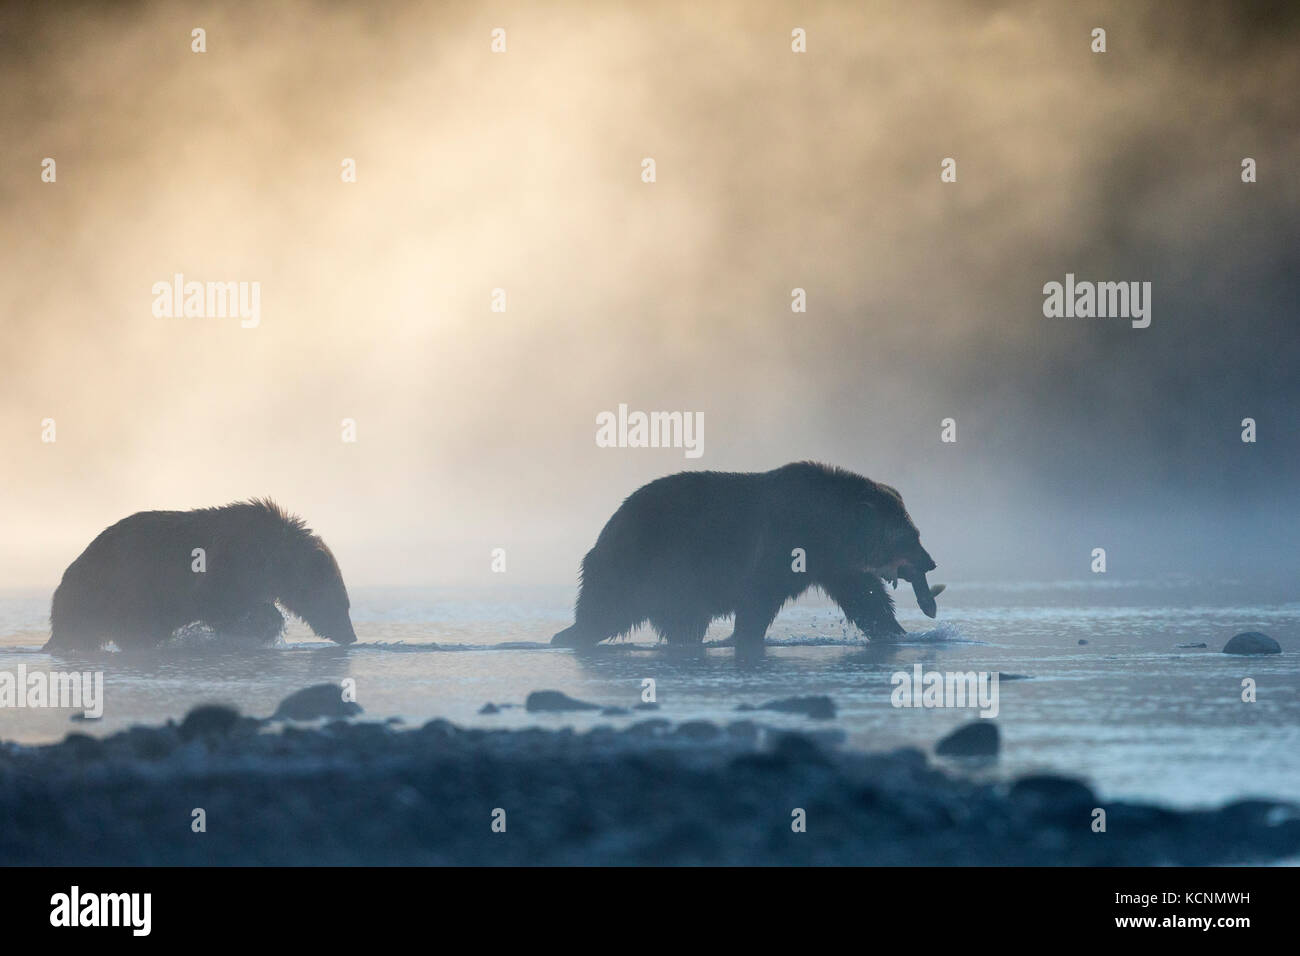 Grizzly bear (Ursus arctos horribilis), female with sockeye salmon (Oncorhynchus nerka) and cub, in morning mist, Chilcotin Region, British Columbia, Canada Stock Photo